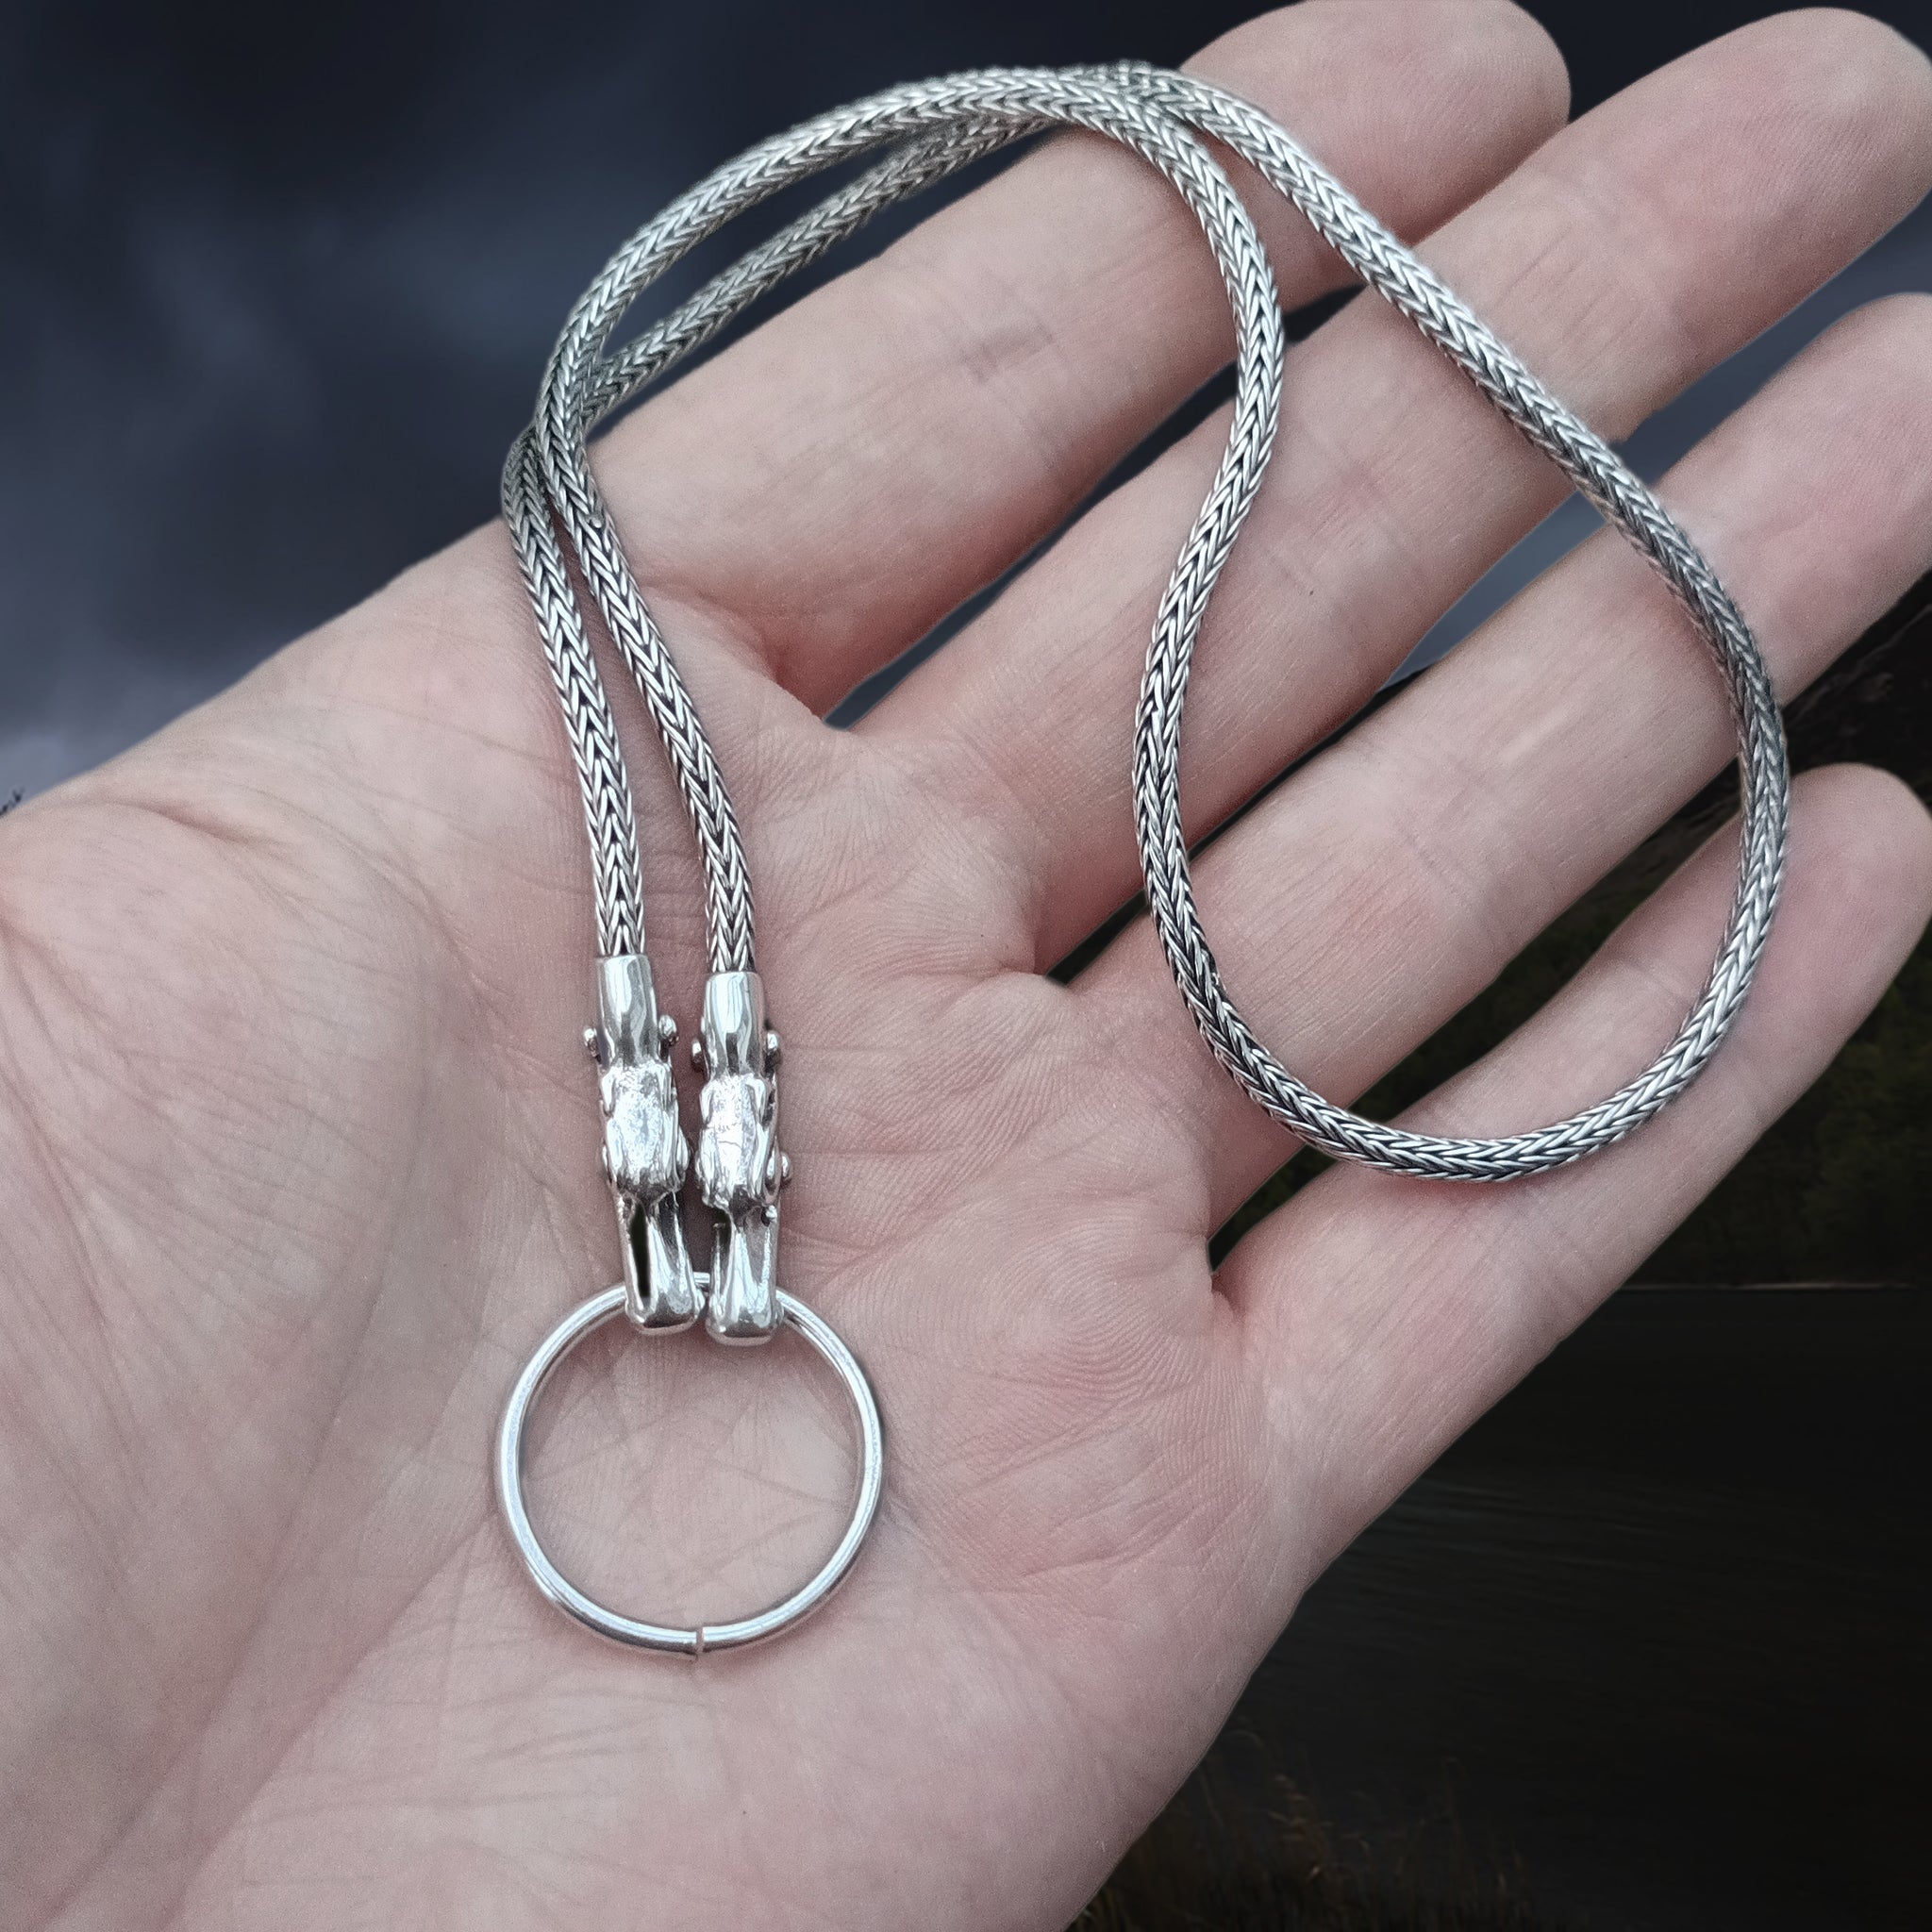 Slim Silver Snake Chain Pendant Necklace with Tromso Dragon Heads and Split Ring on Hand